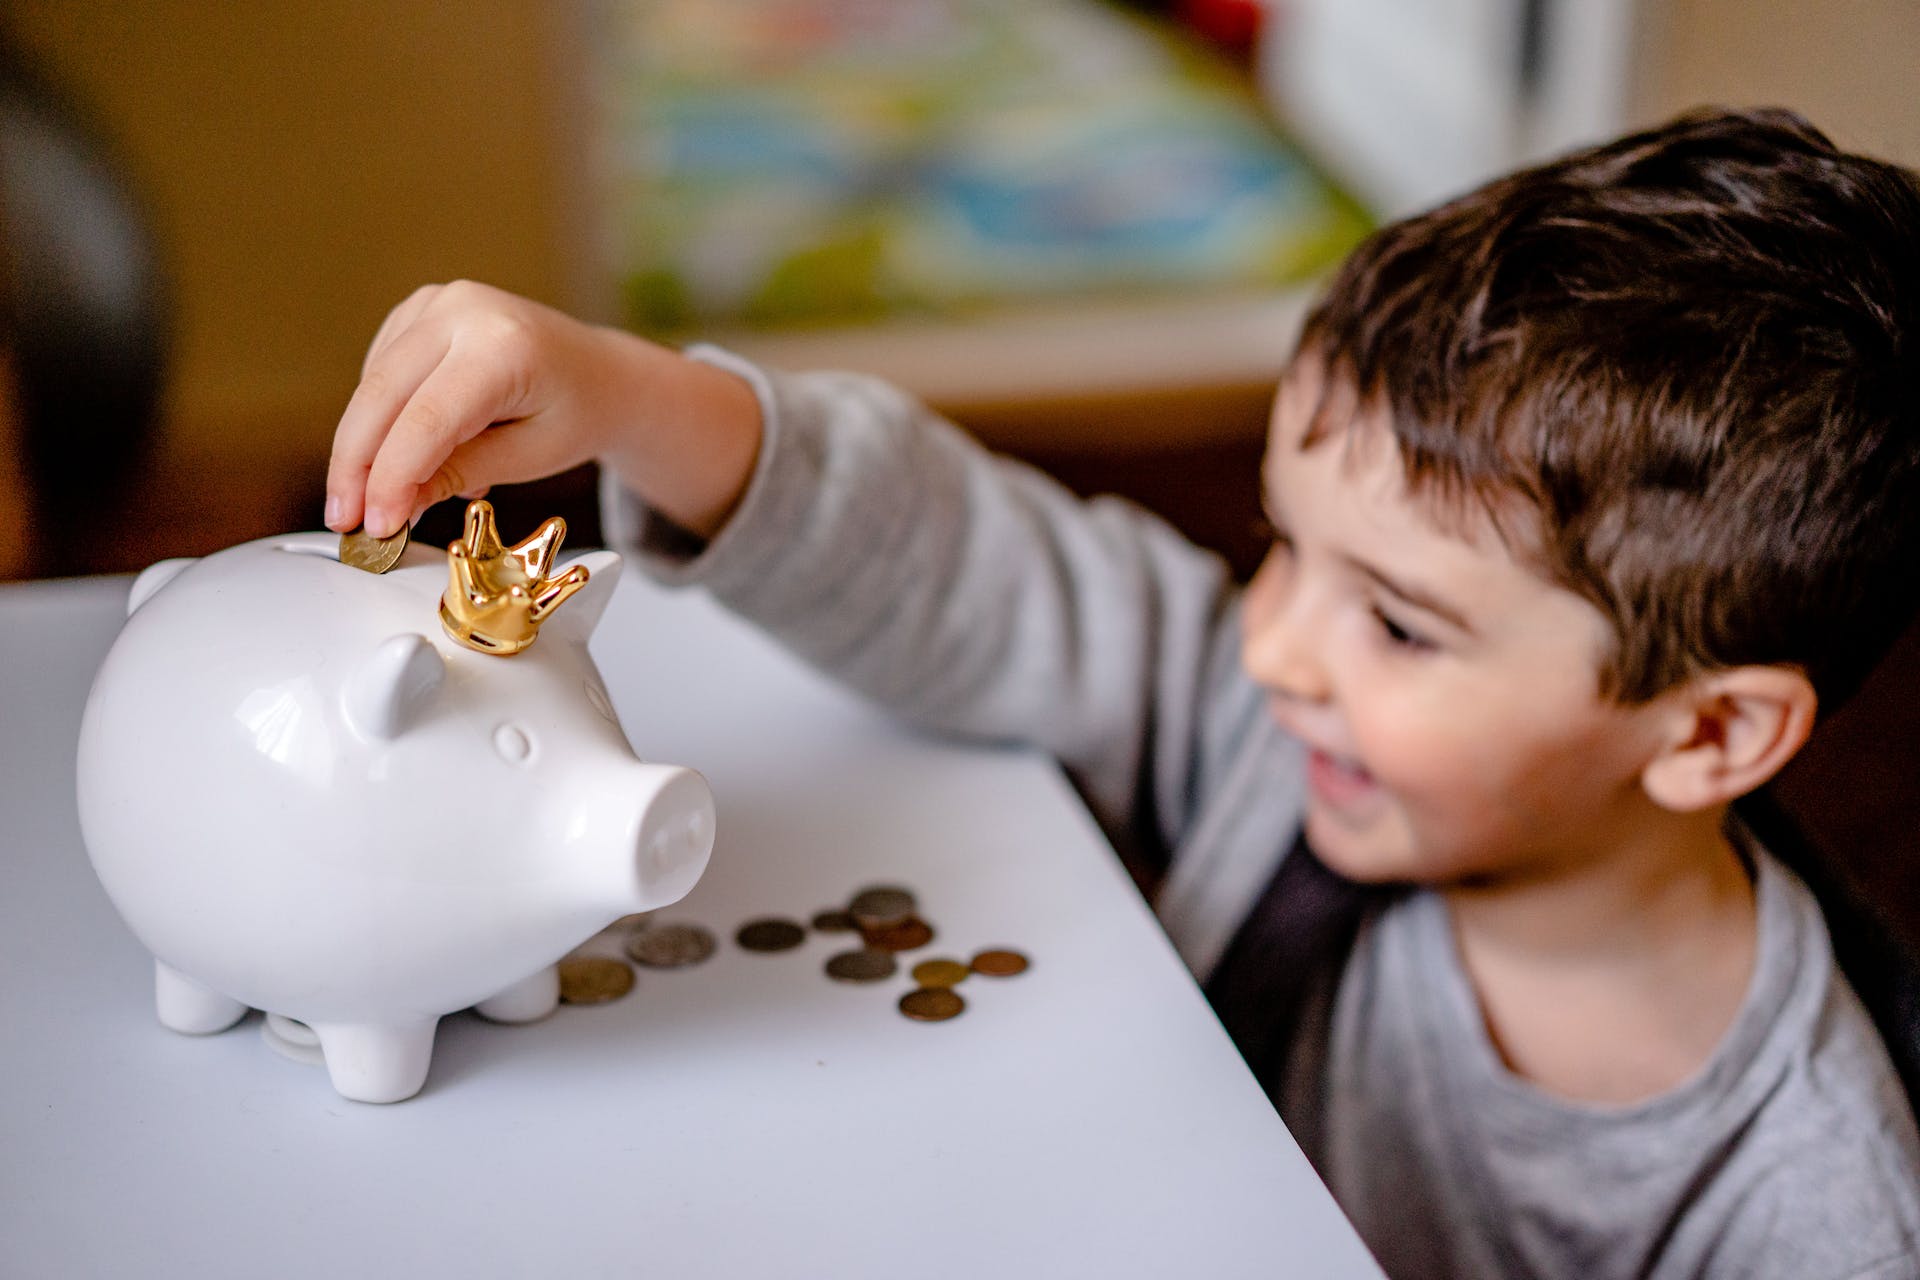 A boy dropping coins in a piggy bank | Source: Pexels